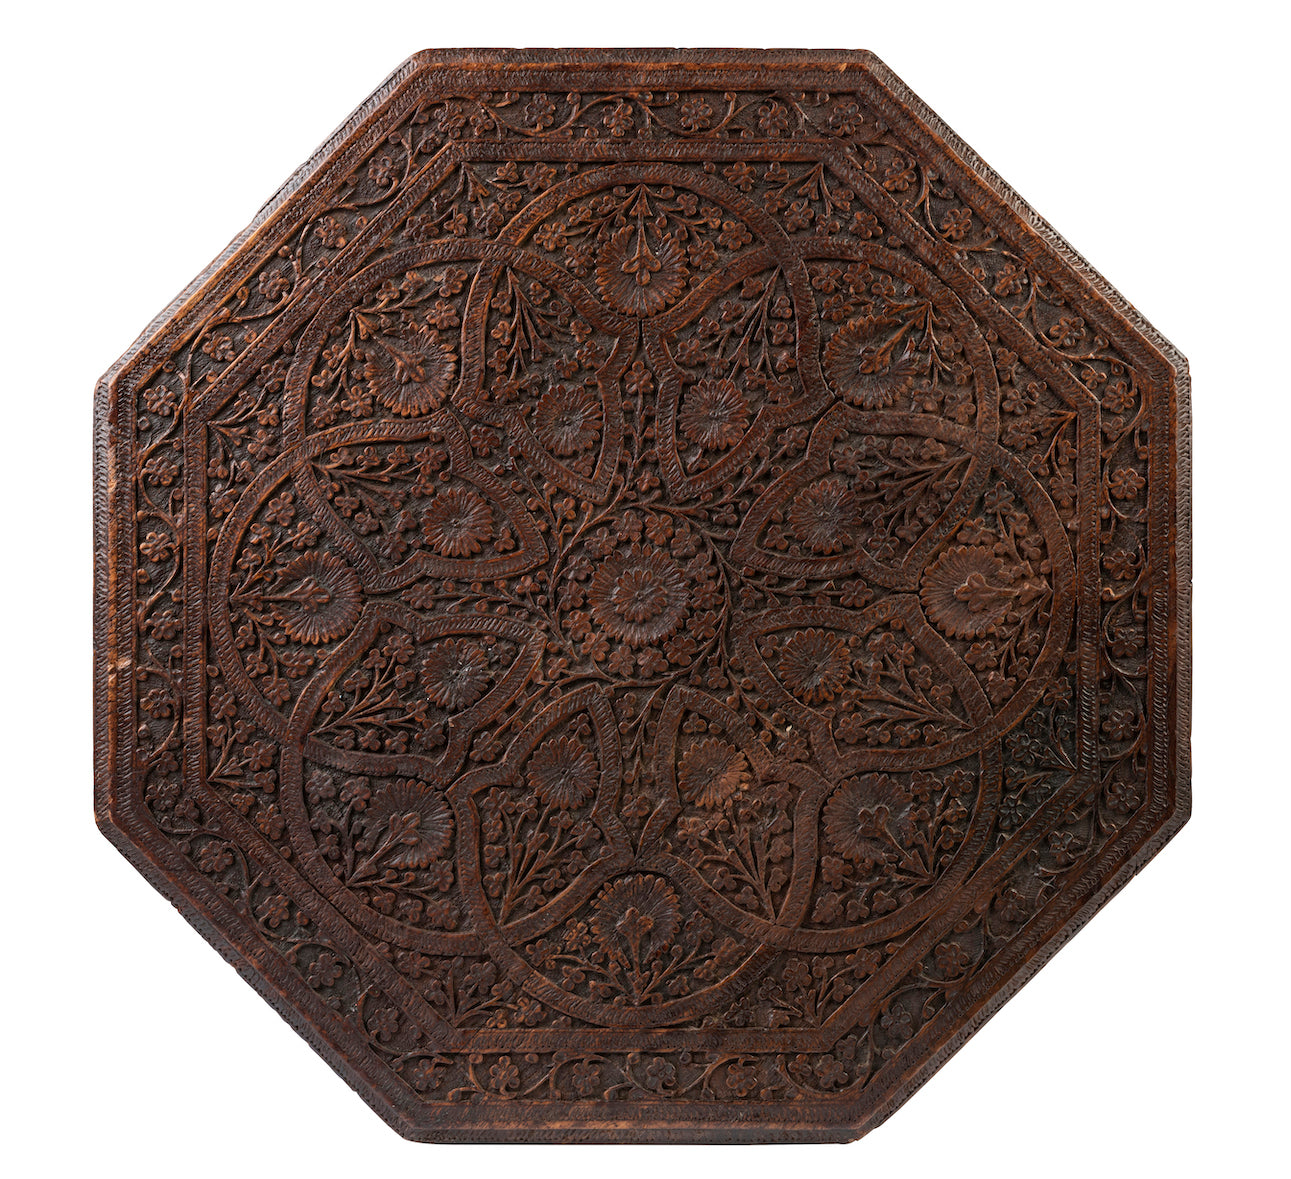 SOLD A fine Kashmiri carved octagonal occasional table with cast iron base, Anglo-Indian 19th Century